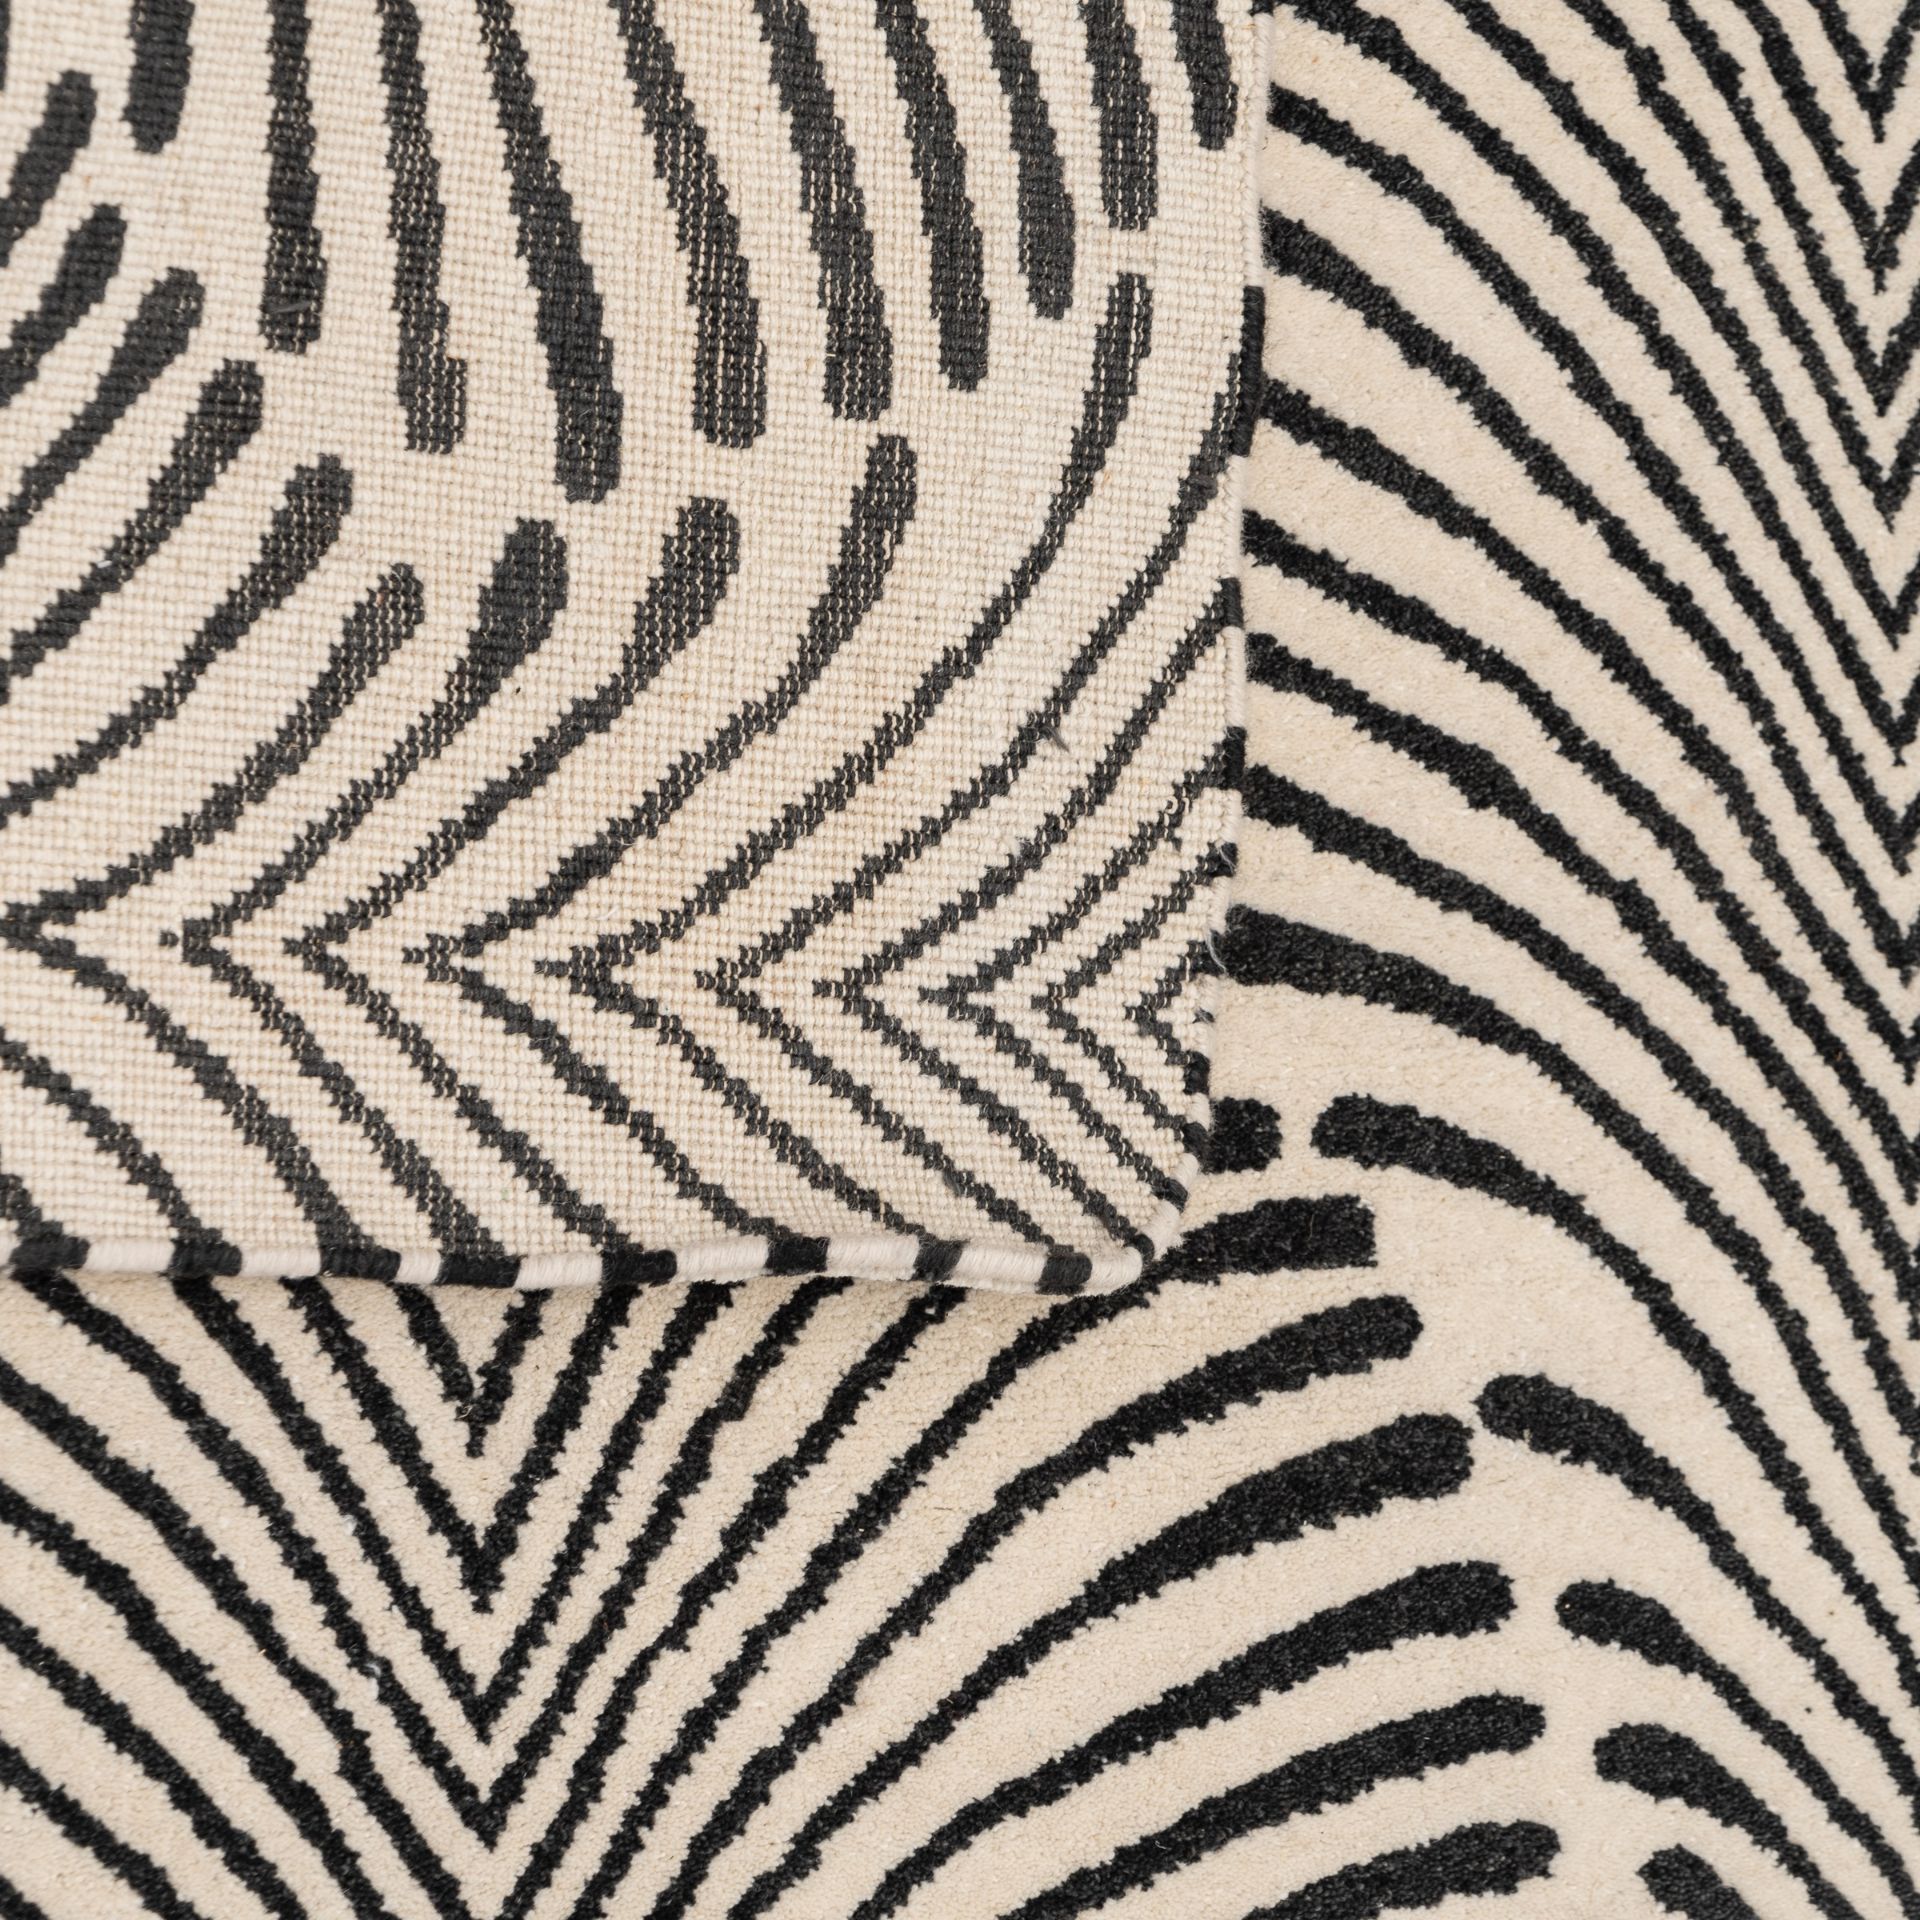 Manner of Oliver Hill (1887-1968) Art Deco style rug with zebra pattern 210 x 123cm. 210cm x 123cm - Image 2 of 2